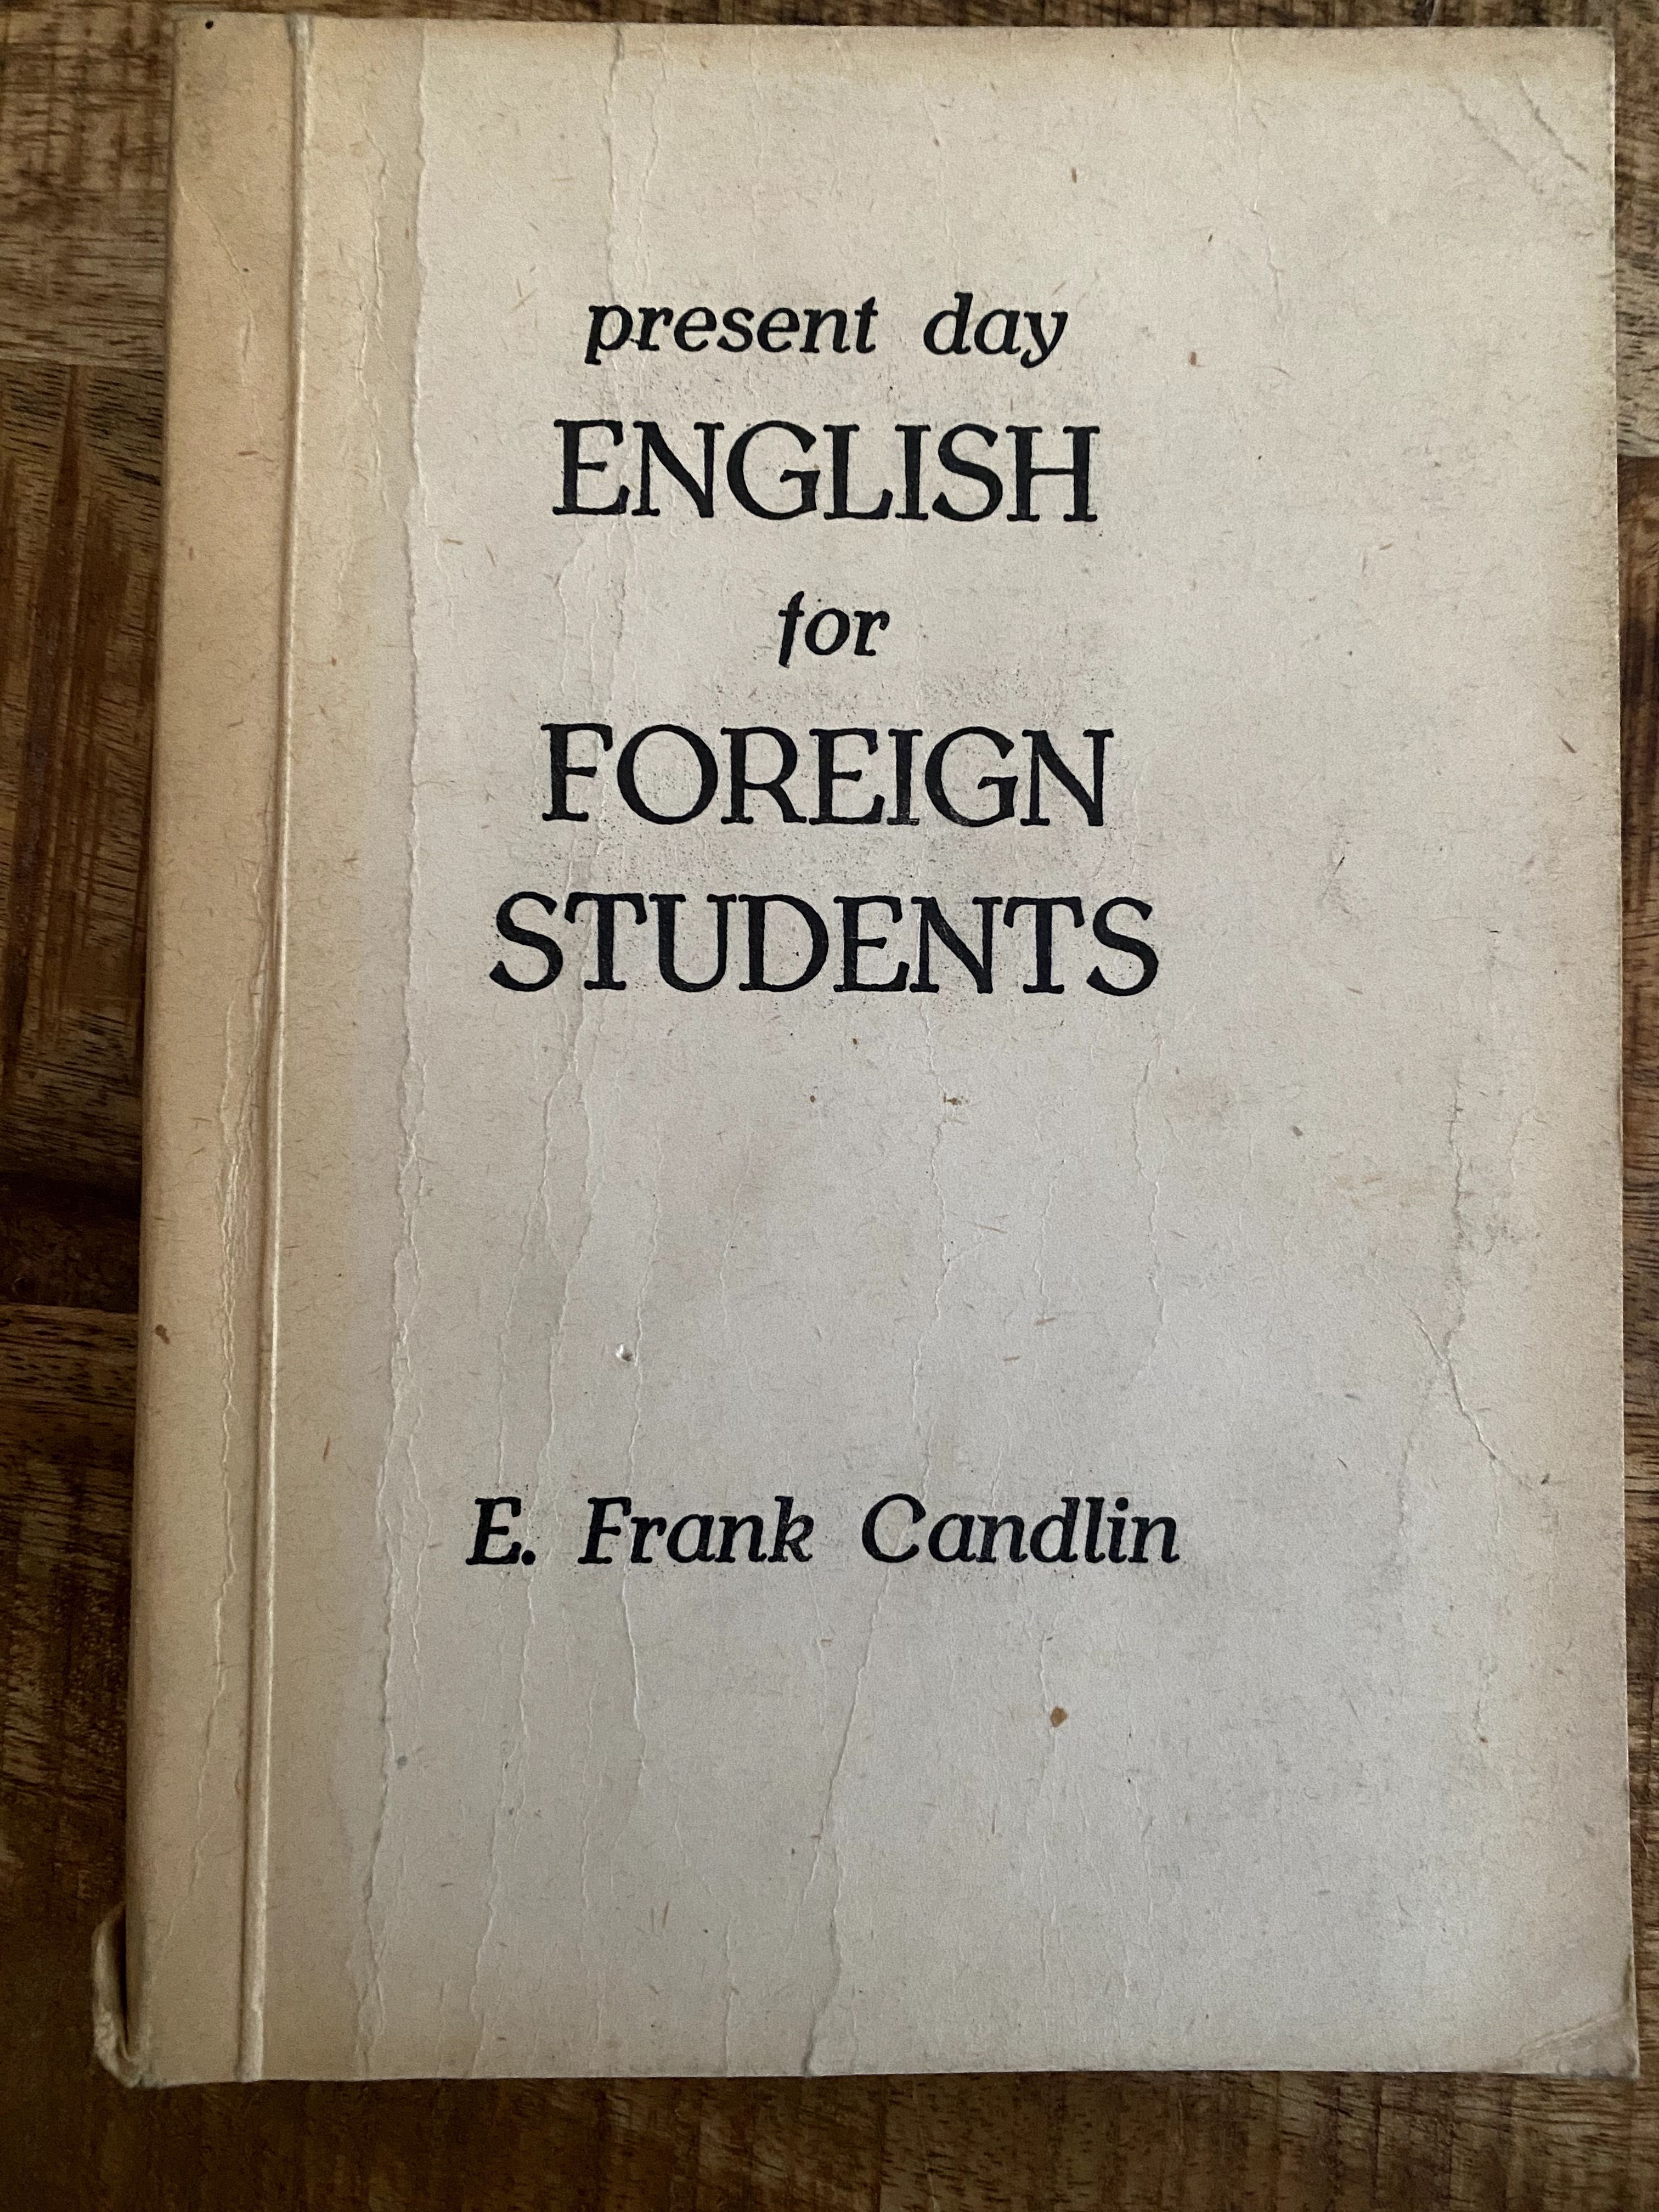 Present day English for foreign students - Frank Candlin